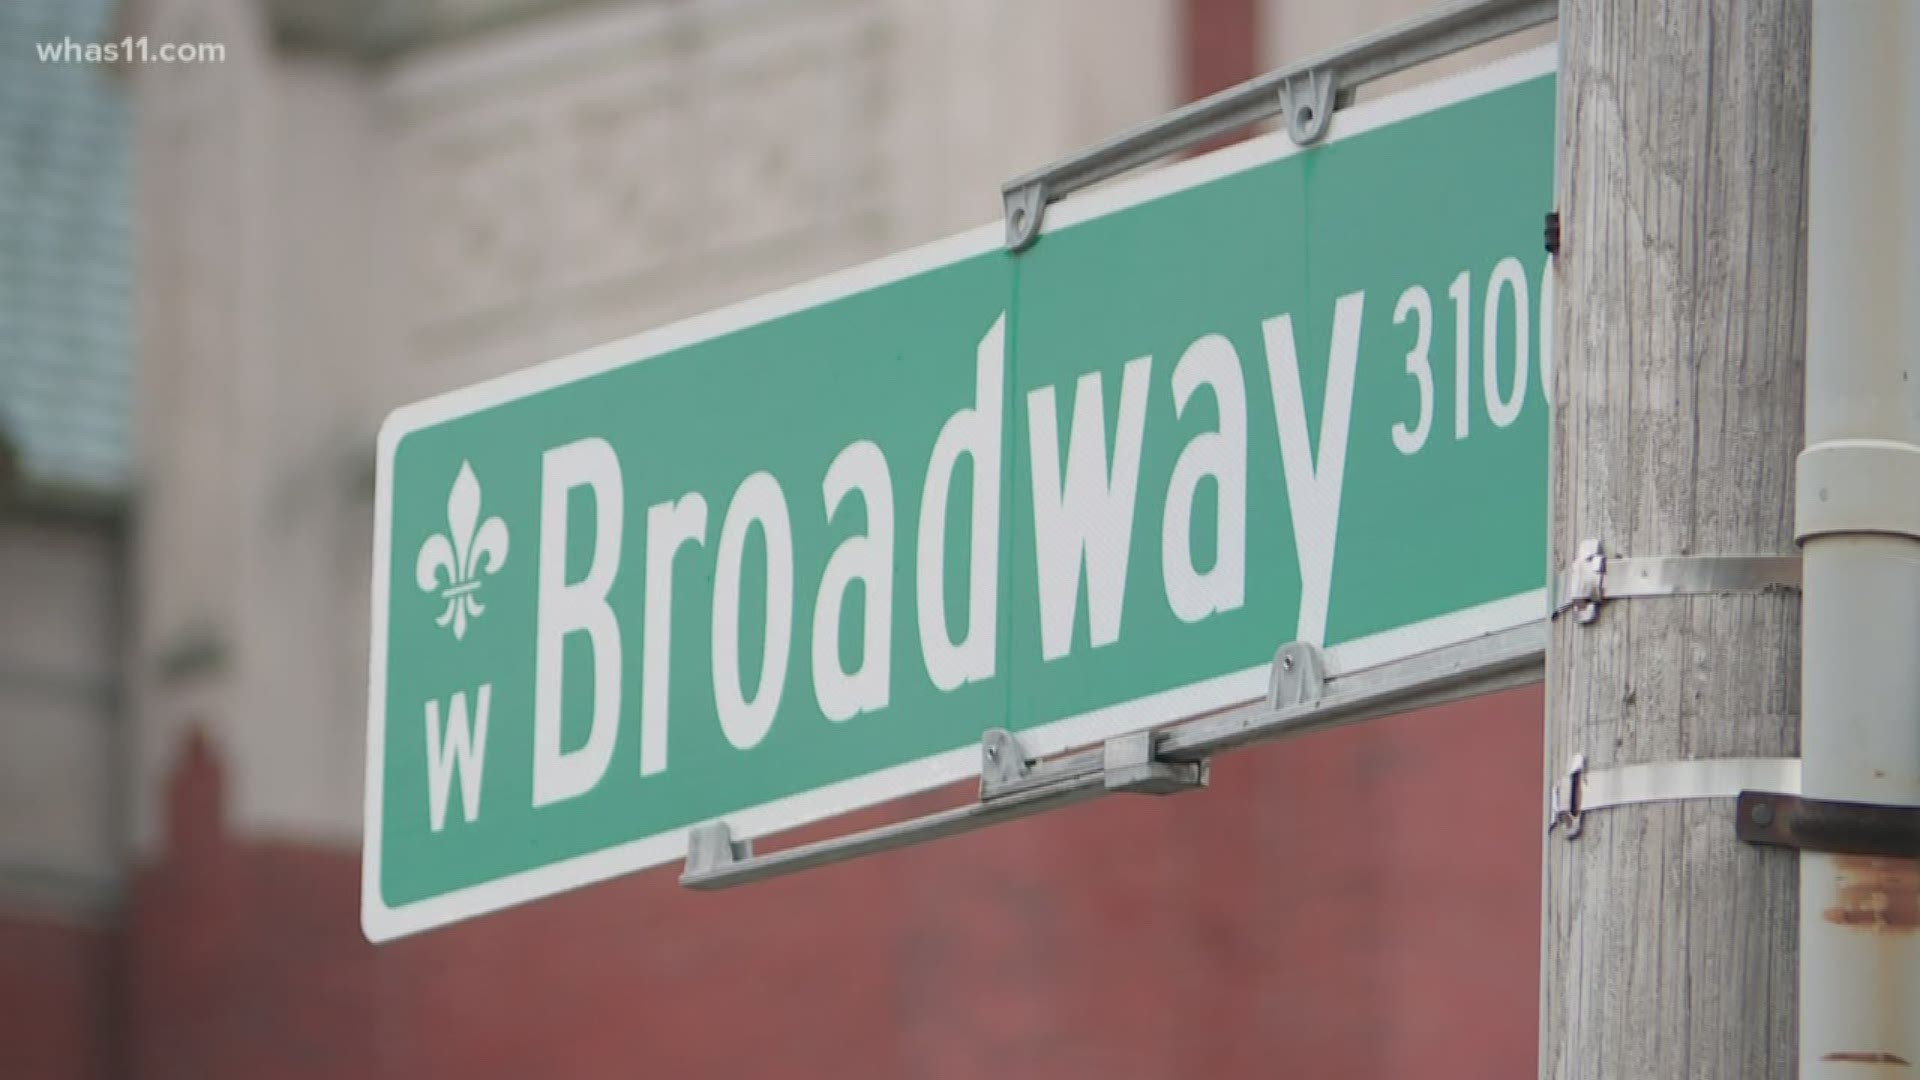 The new broadway plan is also one designed to make it safer and hopefully, just as lively as it once was.